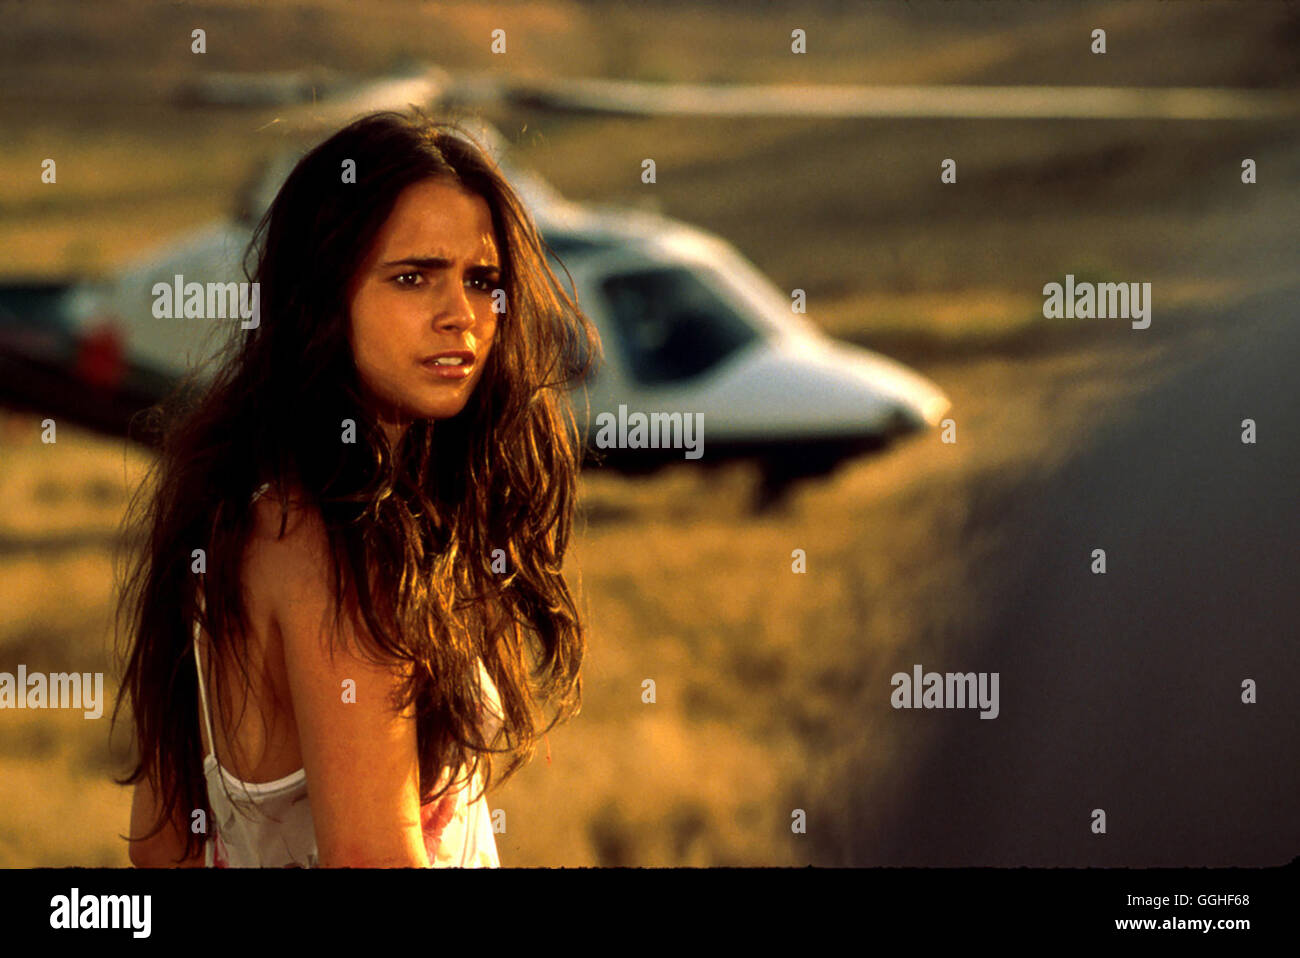 DER FAST AND THE FURIOUS / USA 2001 / Rob Cohen Szene Mit Letty (MICHELLE RODRIGUEZ) Regie: Rob Cohen Stockfoto